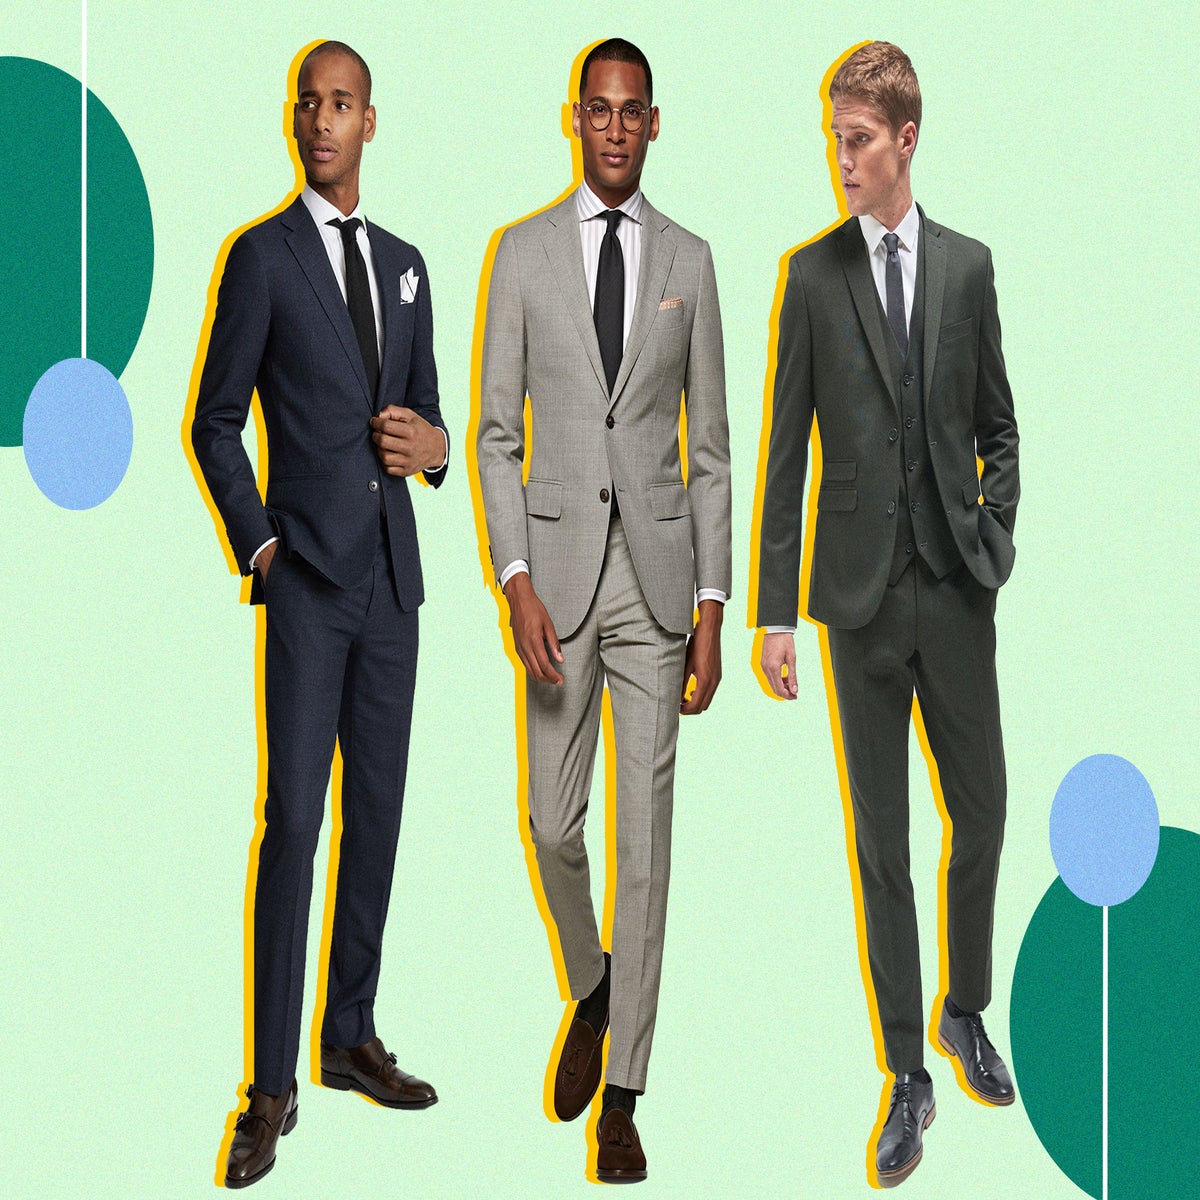 Best suits for men 2021: 8 styles for every budget and occasion